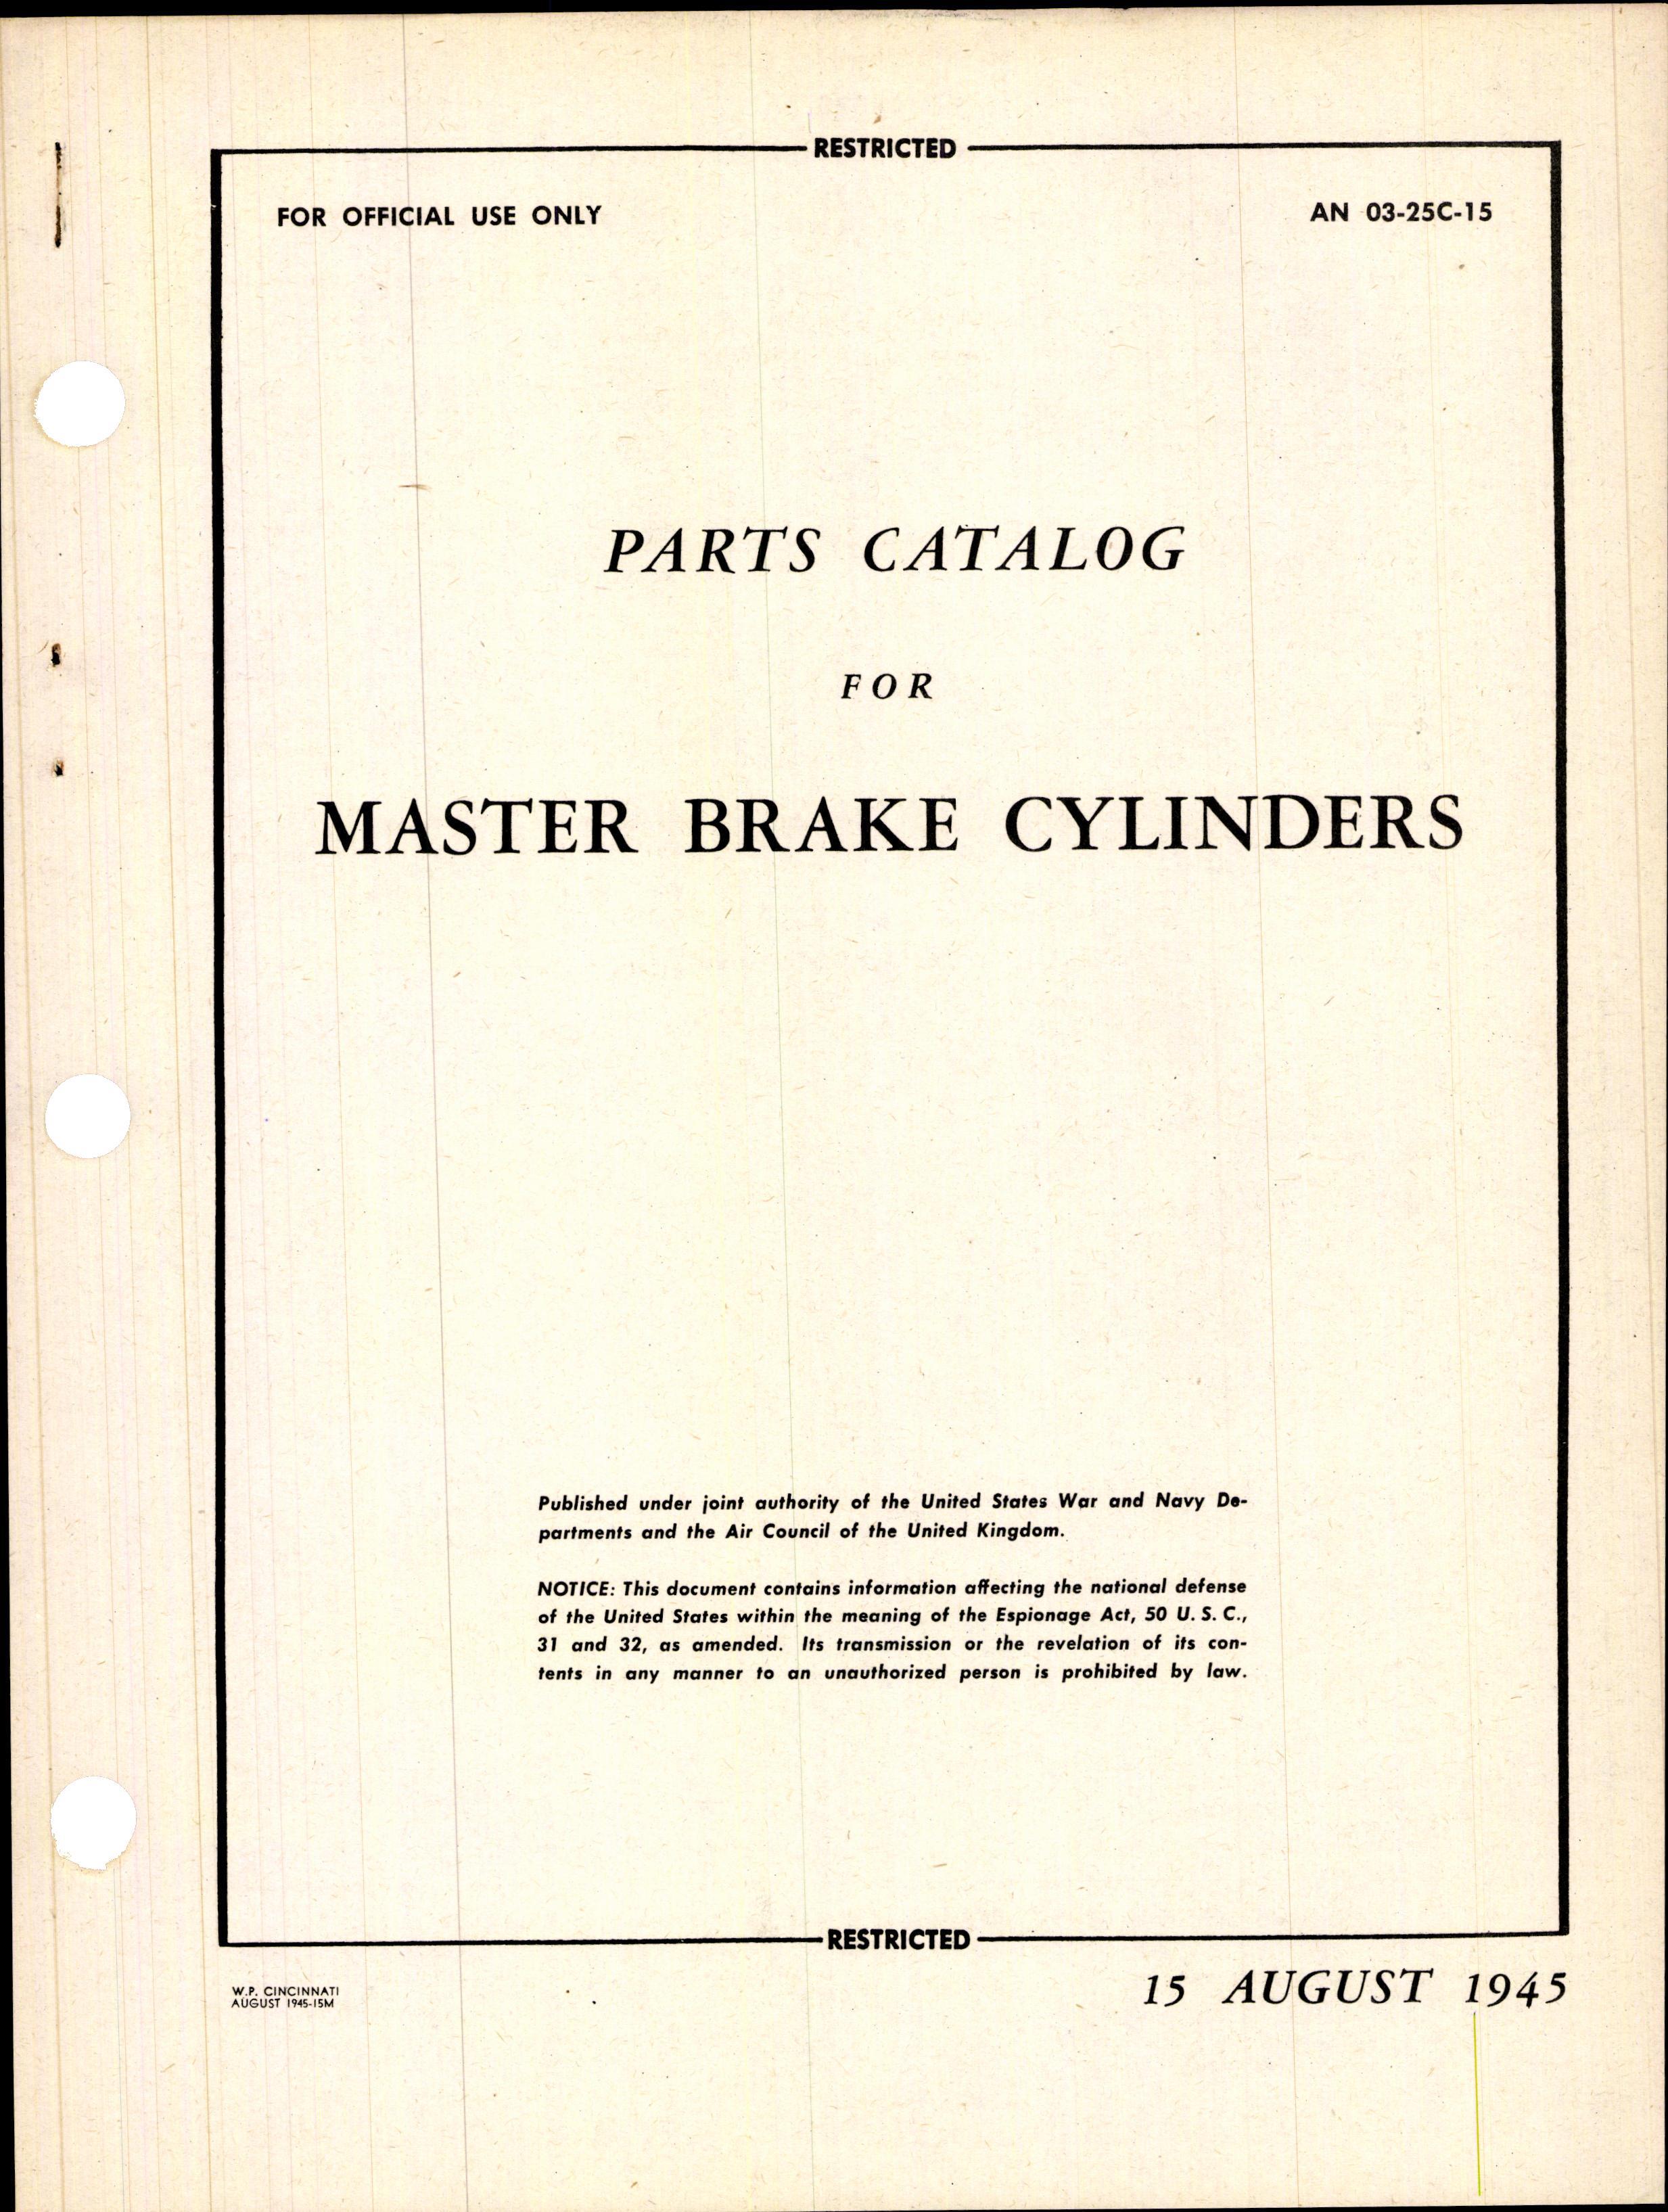 Sample page 5 from AirCorps Library document: Parts Catalog for Bendix Master Brake Cylinders